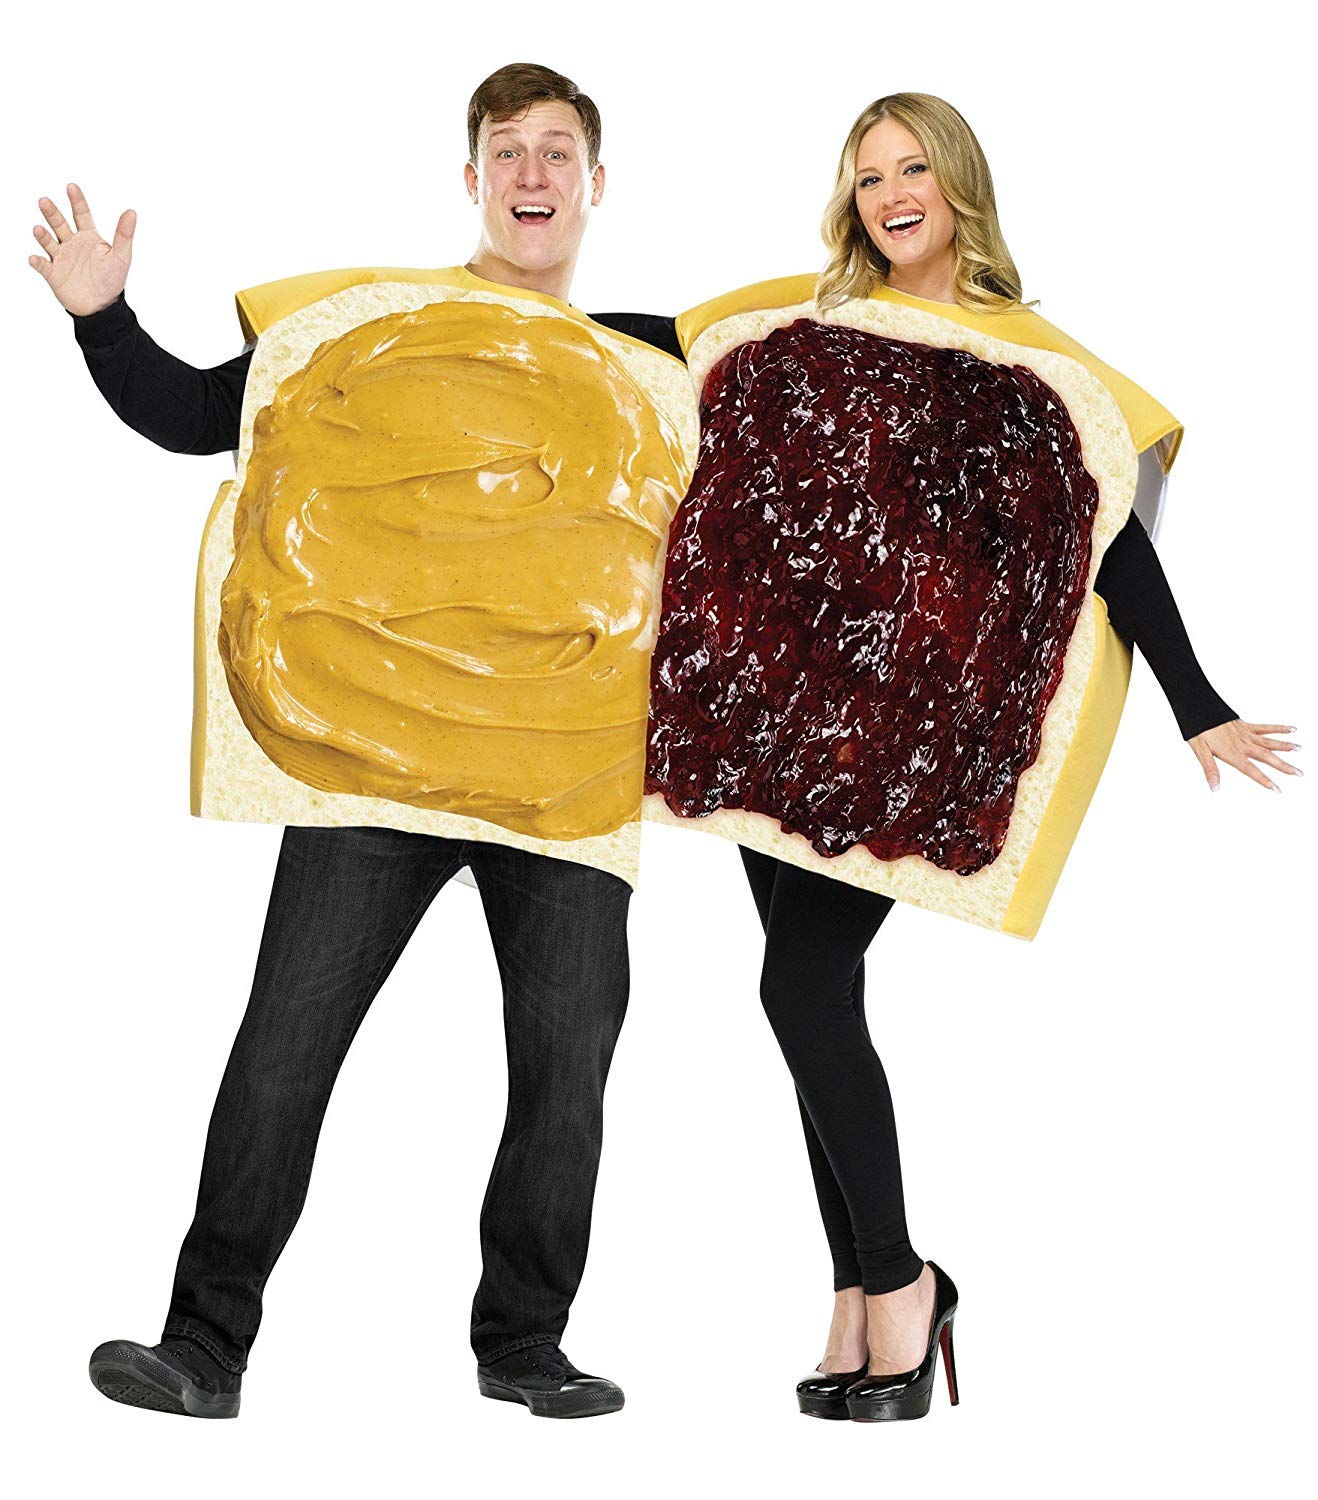 FunWorld Peanut Butter And Jelly Set, Tan/Purple, One Size - Couple Halloween Costumes